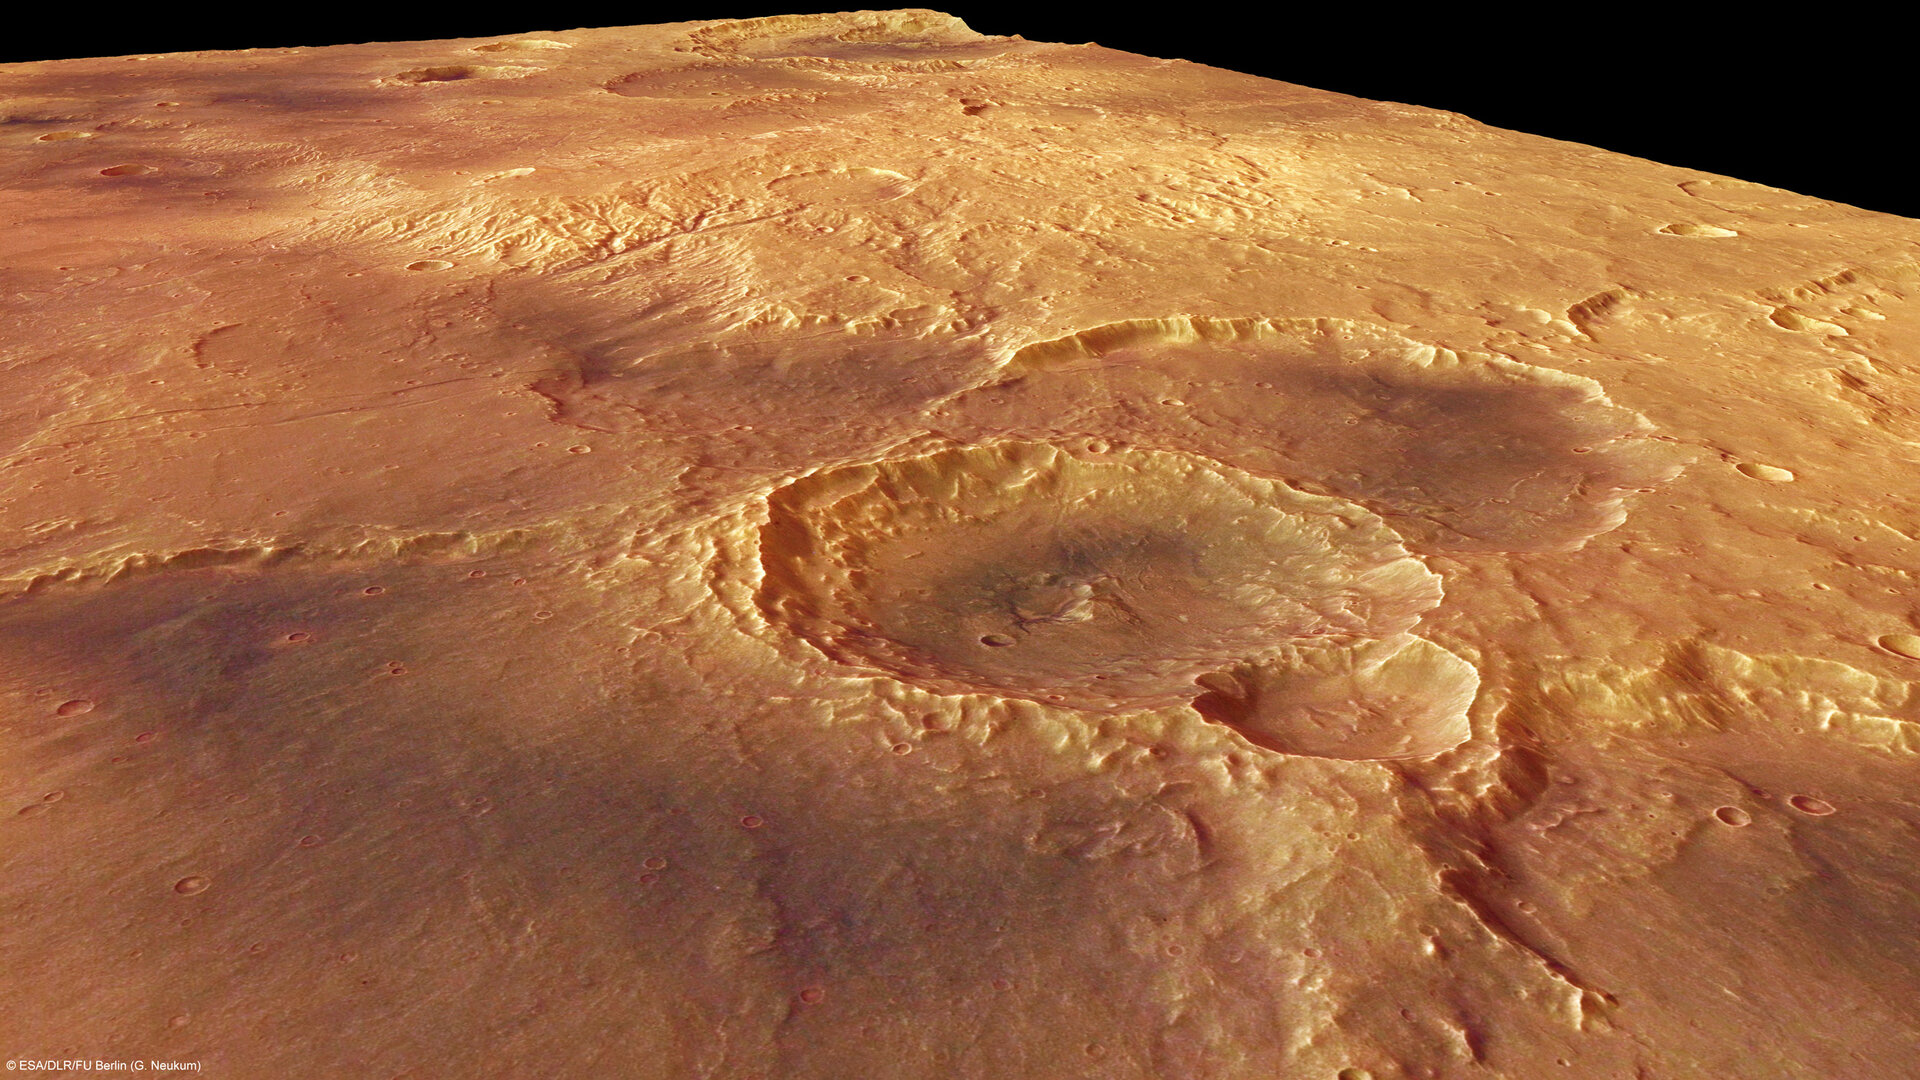 Perspective view of craters in the Sirenum Fossae region of Mars.